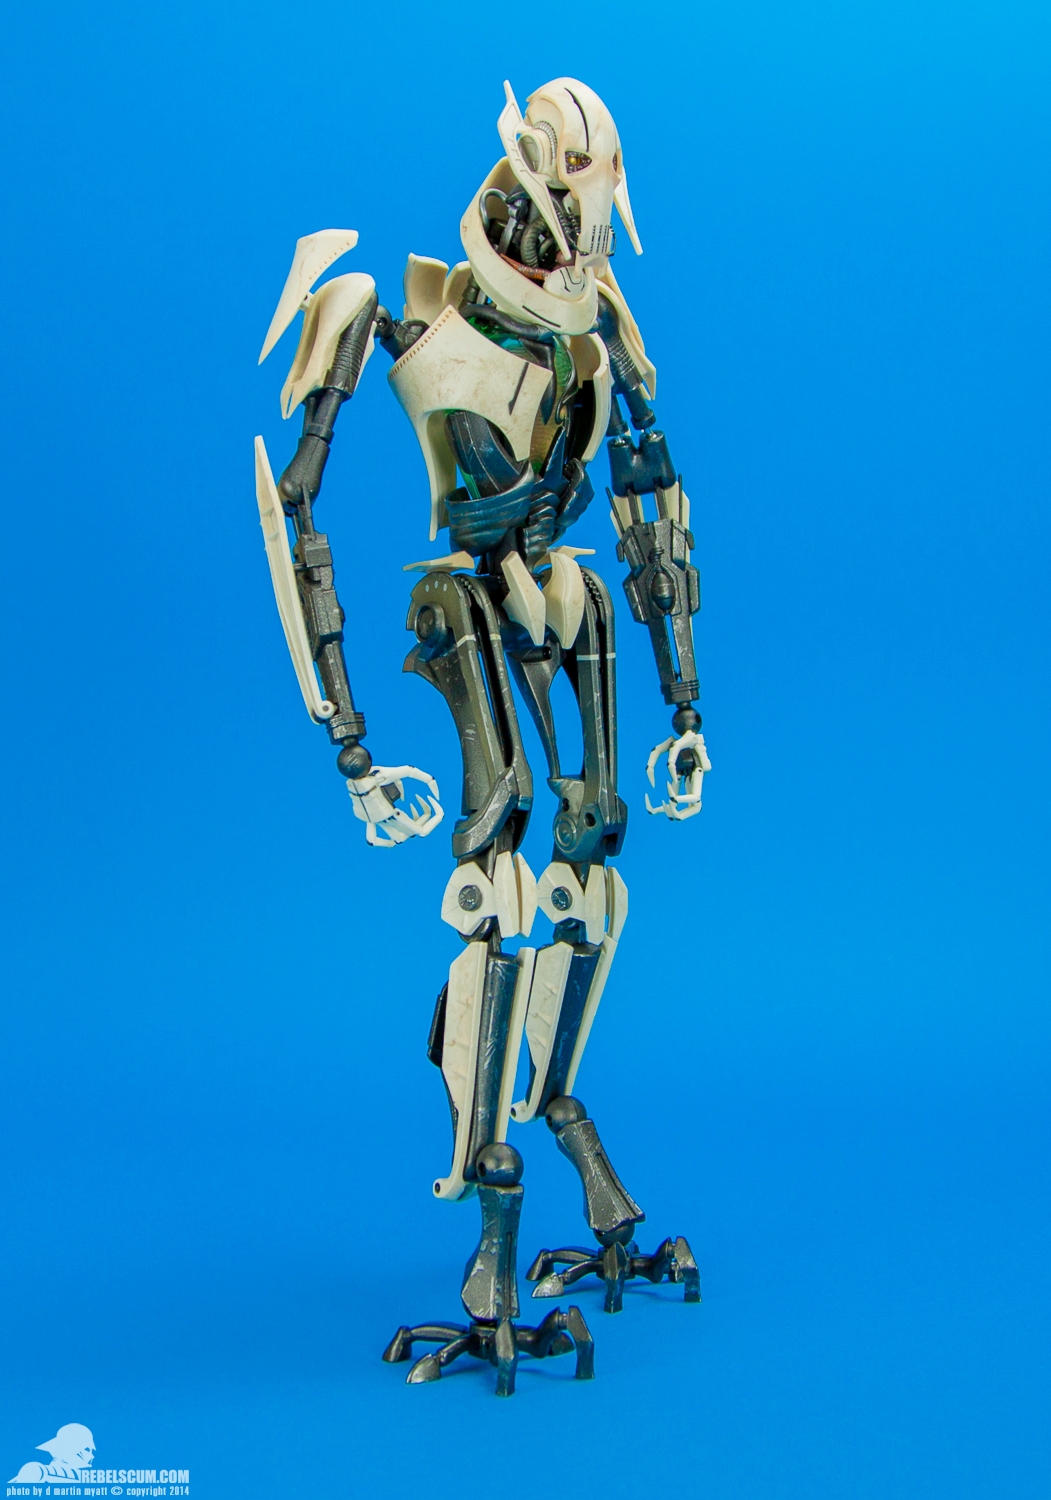 General-Grievous-Sixth-Scale-Figure-Sideshow-Collectibles-002.jpg